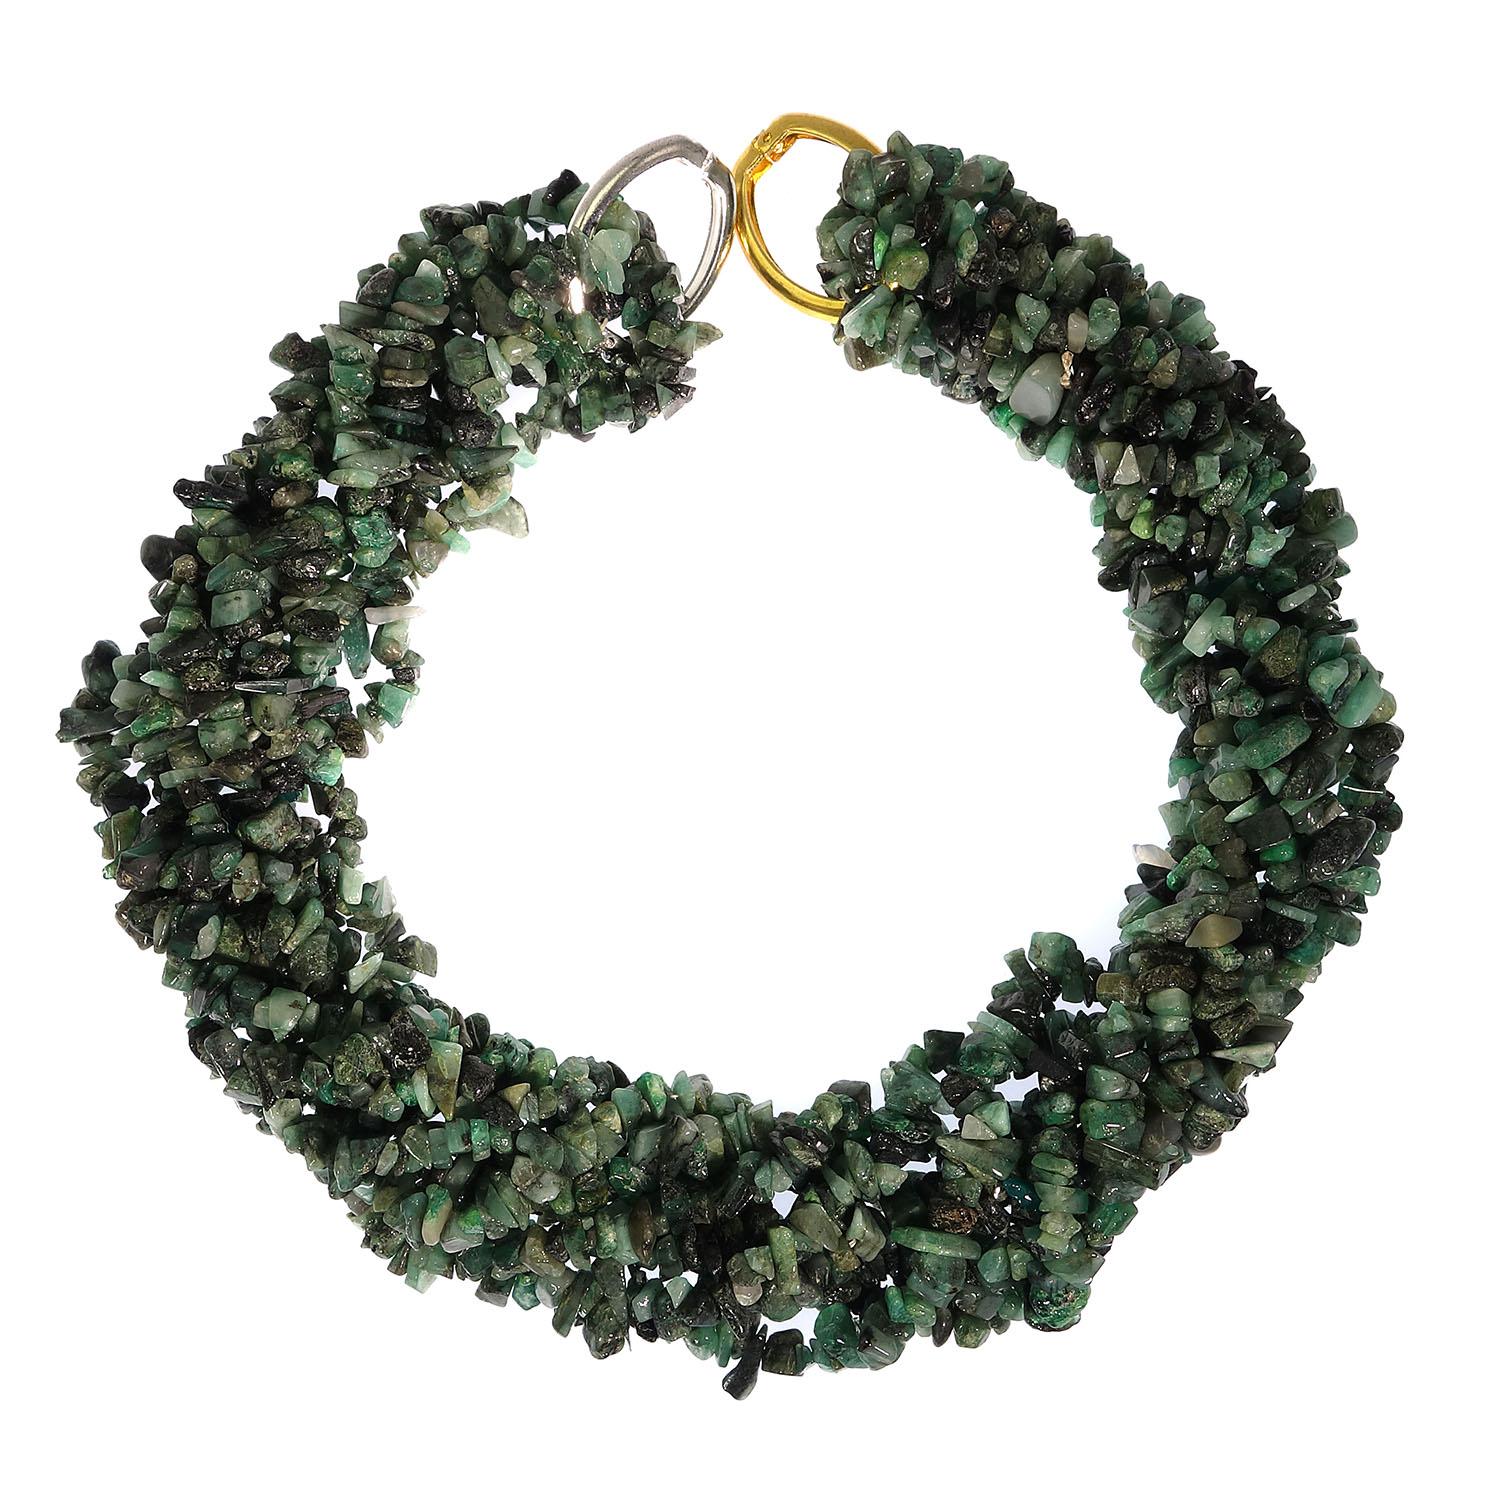 Necklace of green Emerald chips in four continuous strands